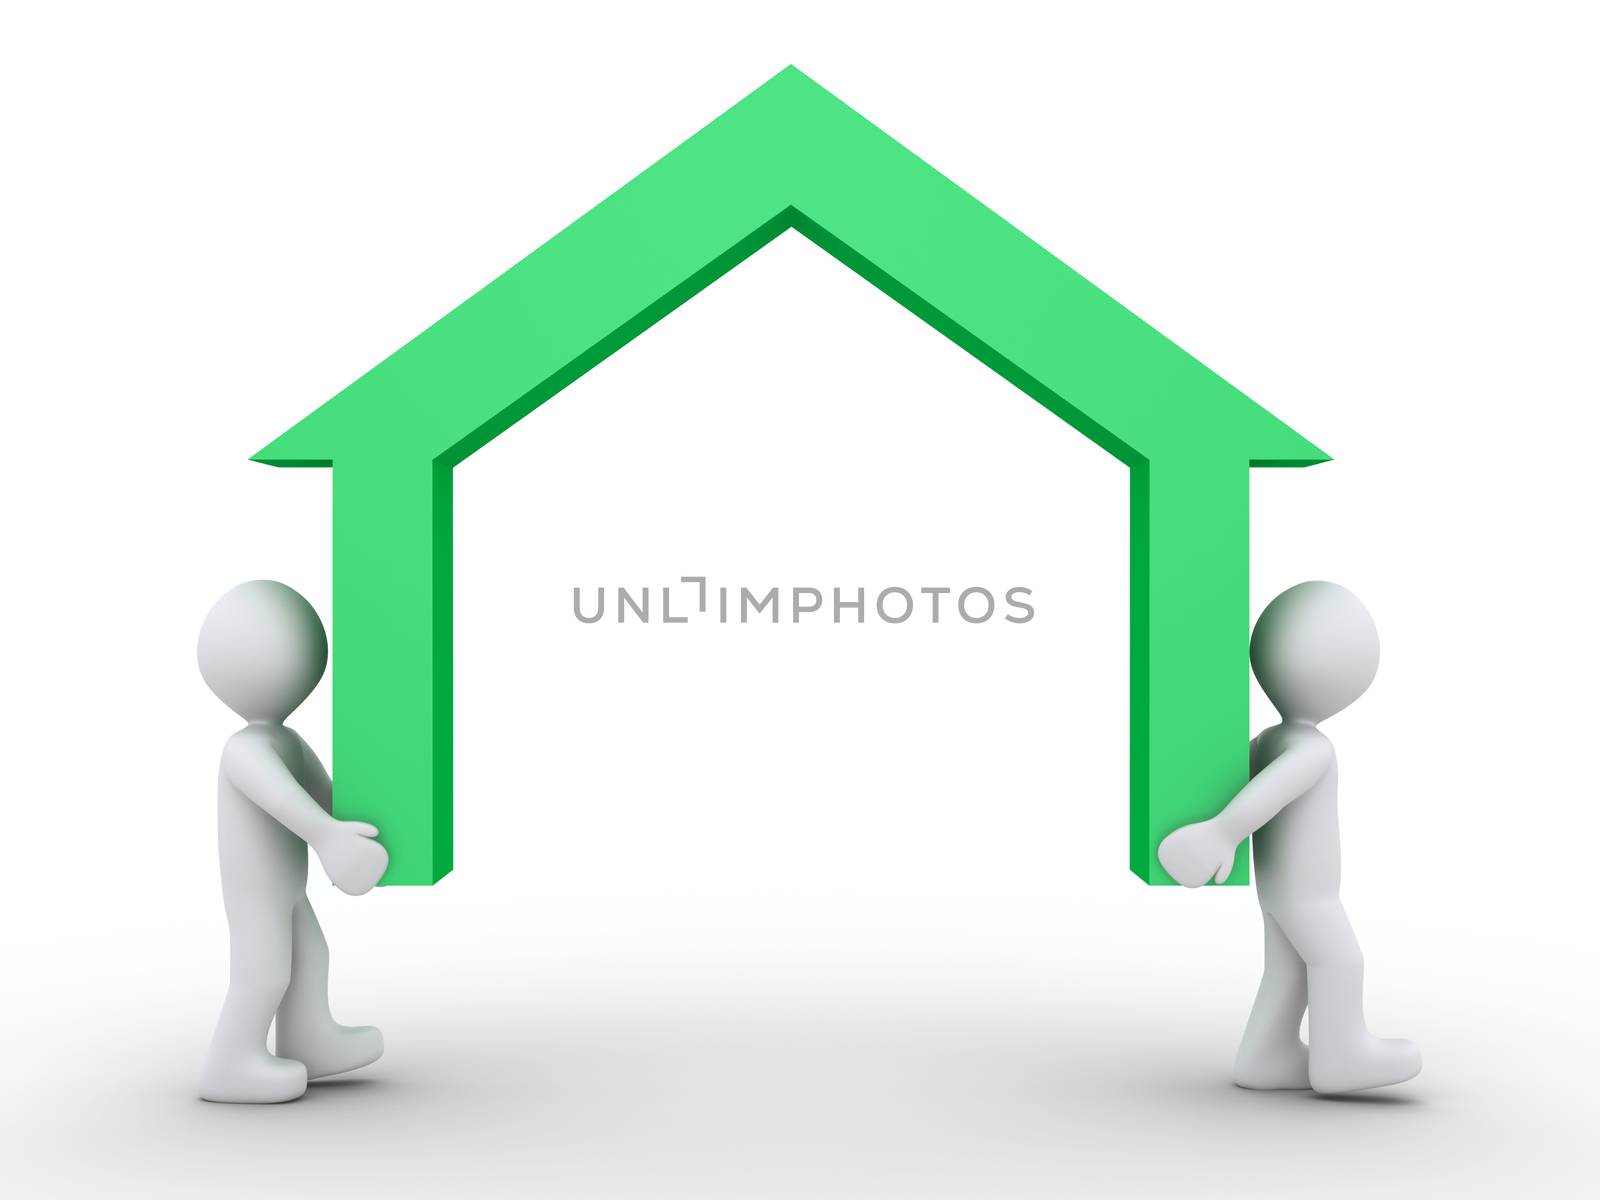 Two 3d people are carrying a house symbol